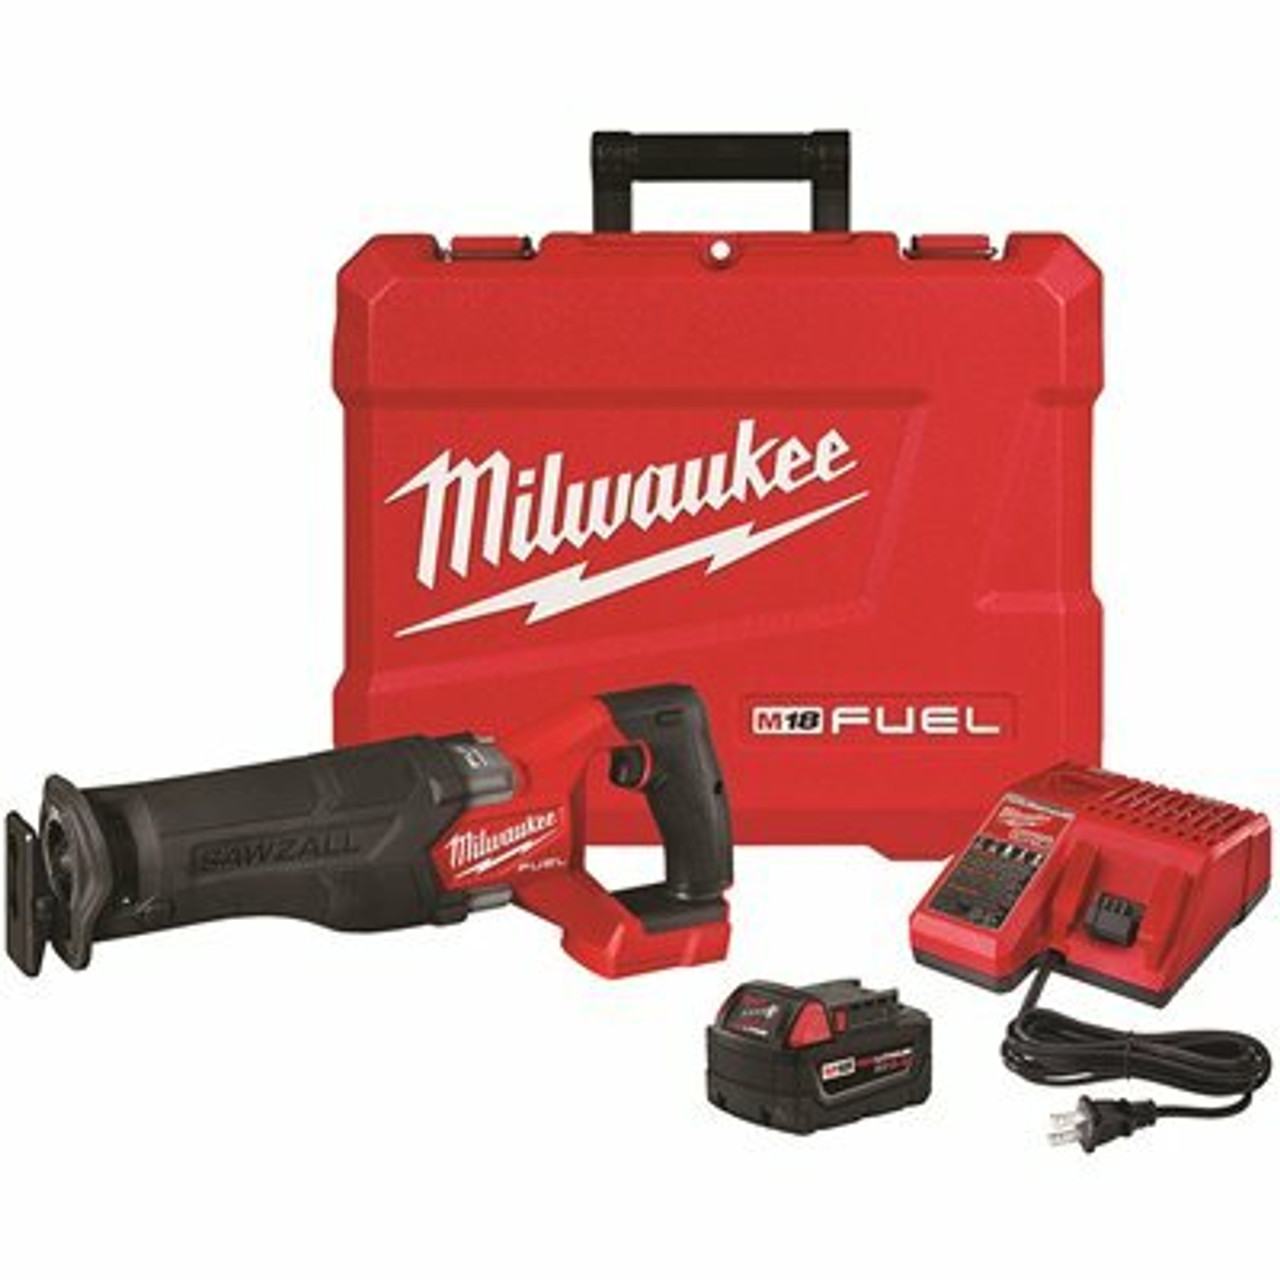 M18 Fuel 18-Volt Lithium-Ion Brushless Cordless Sawzall Reciprocating Saw Kit W/One 5.0 Ah Batteries, Charger And Case